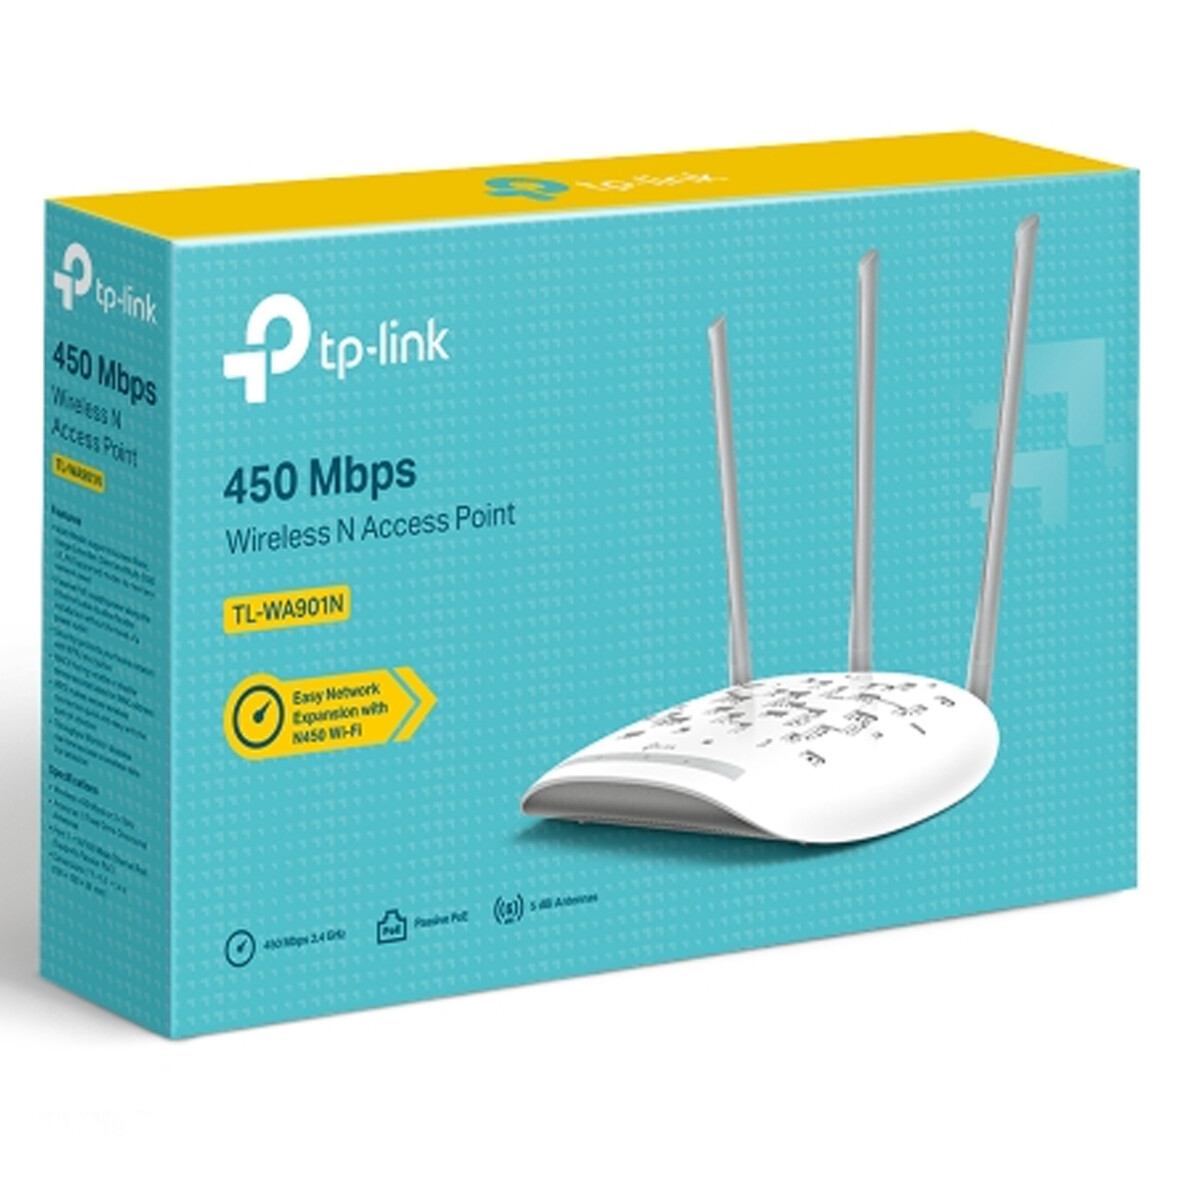 ACCESO PUNTO (ACCESS POINT) INALAMBRICO TP LINK | TL WA901N